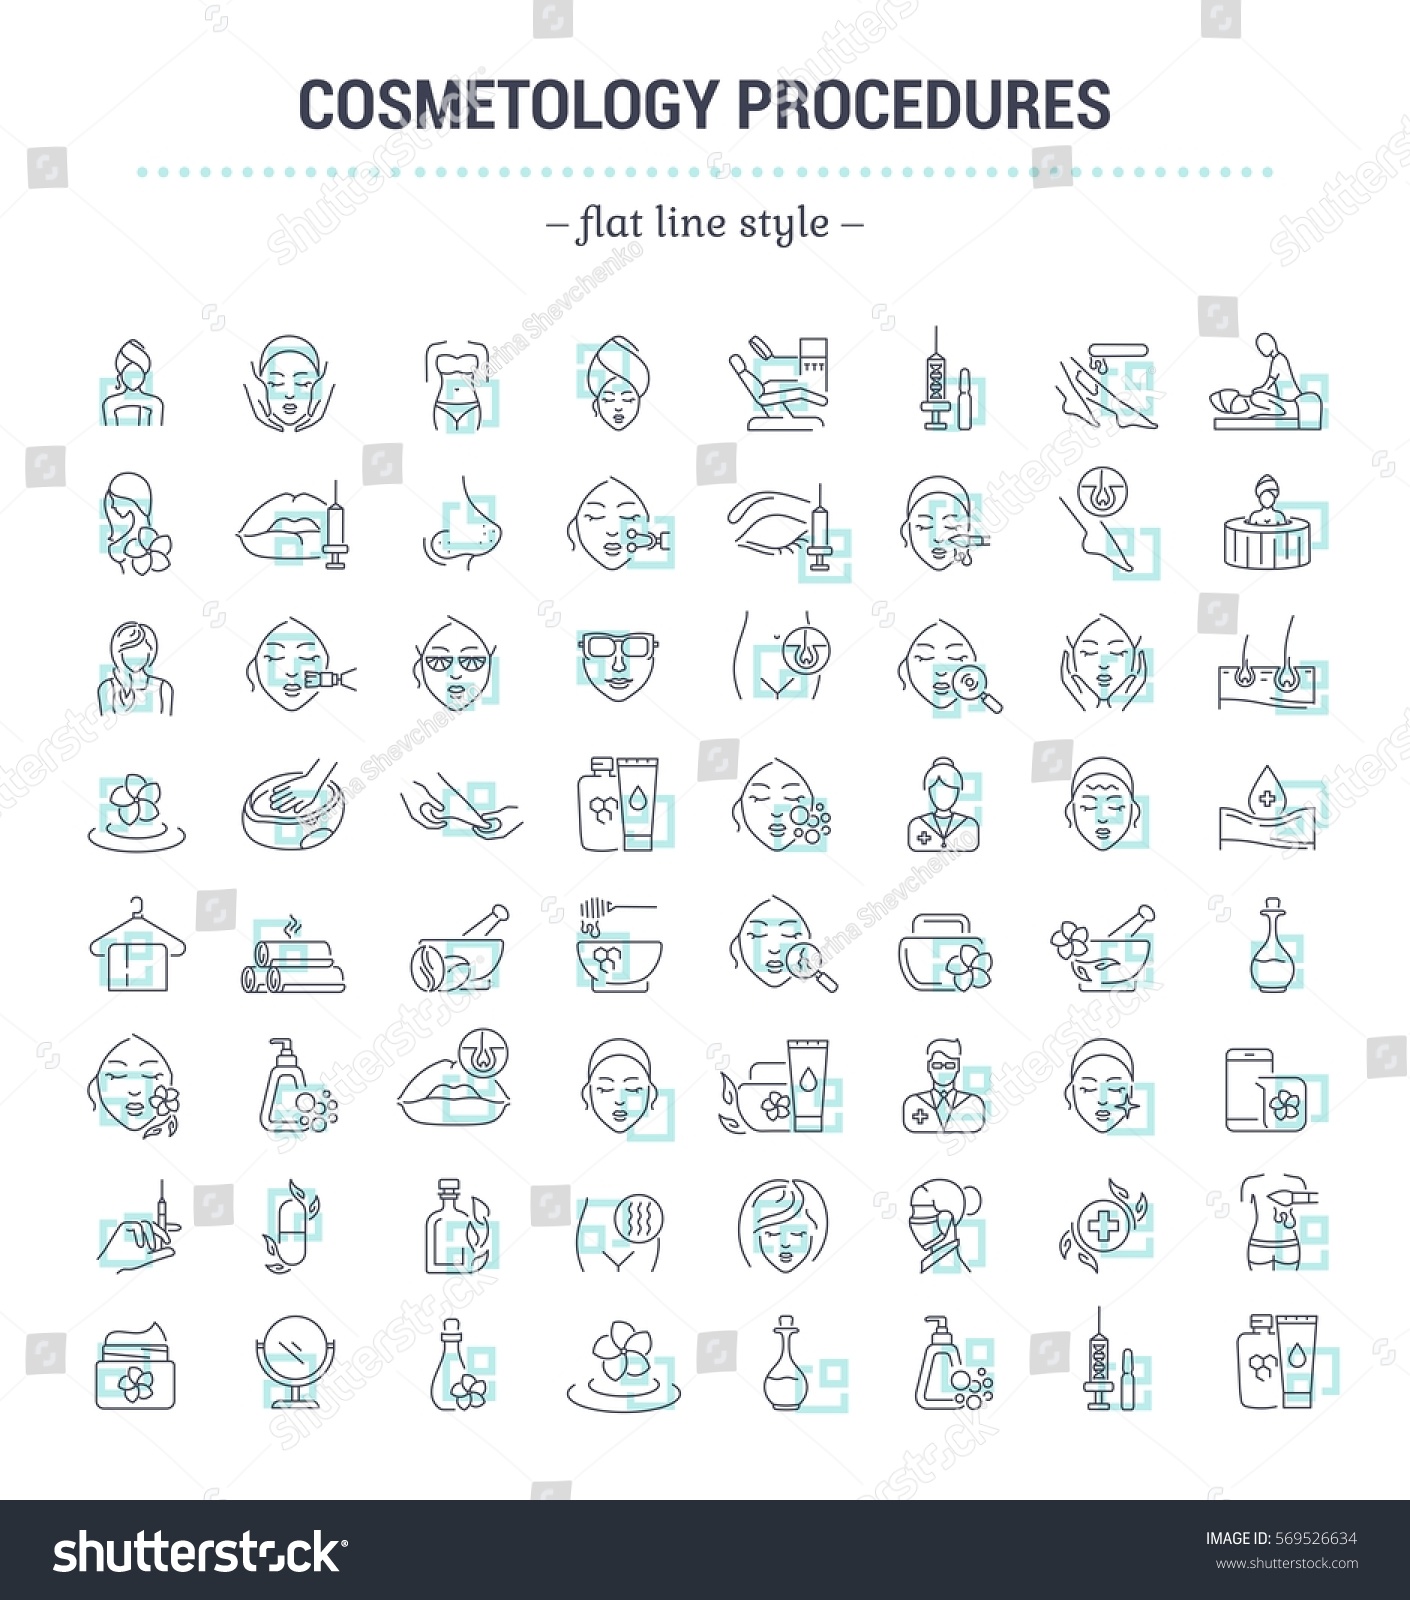 Vector graphic set.Icons in flat, contour,thin and linear design.Cosmetology Clinic. Services, procedures, treatments.Simple isolated icons.Concept illustration for Web site app.Sign,symbol,element. #569526634